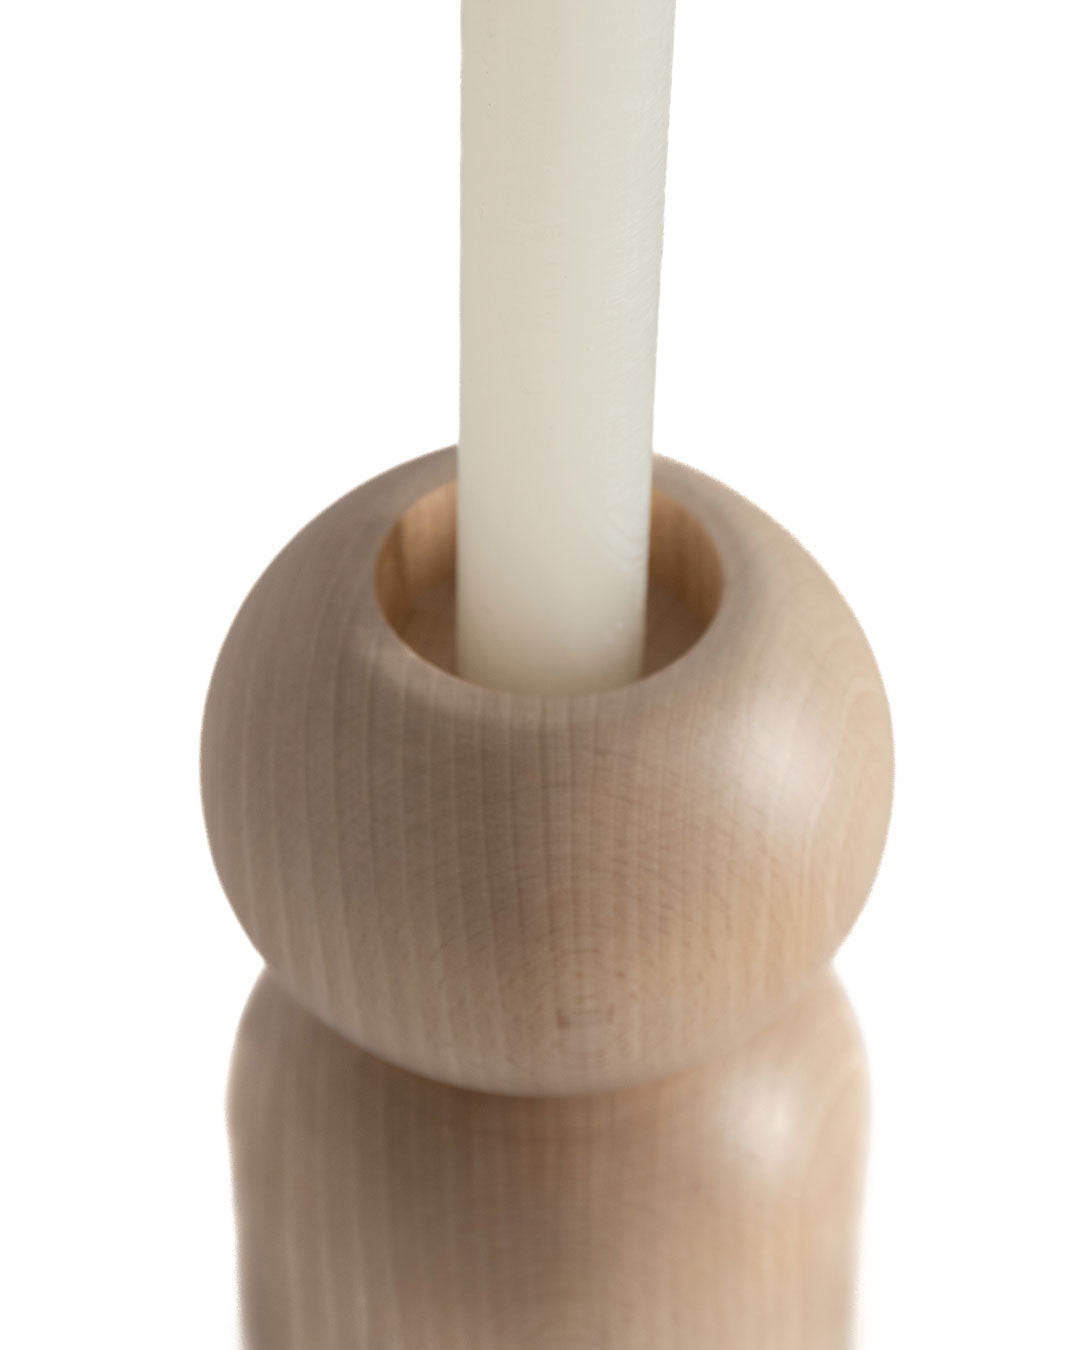 Candleholder-3-in-1-low candle support